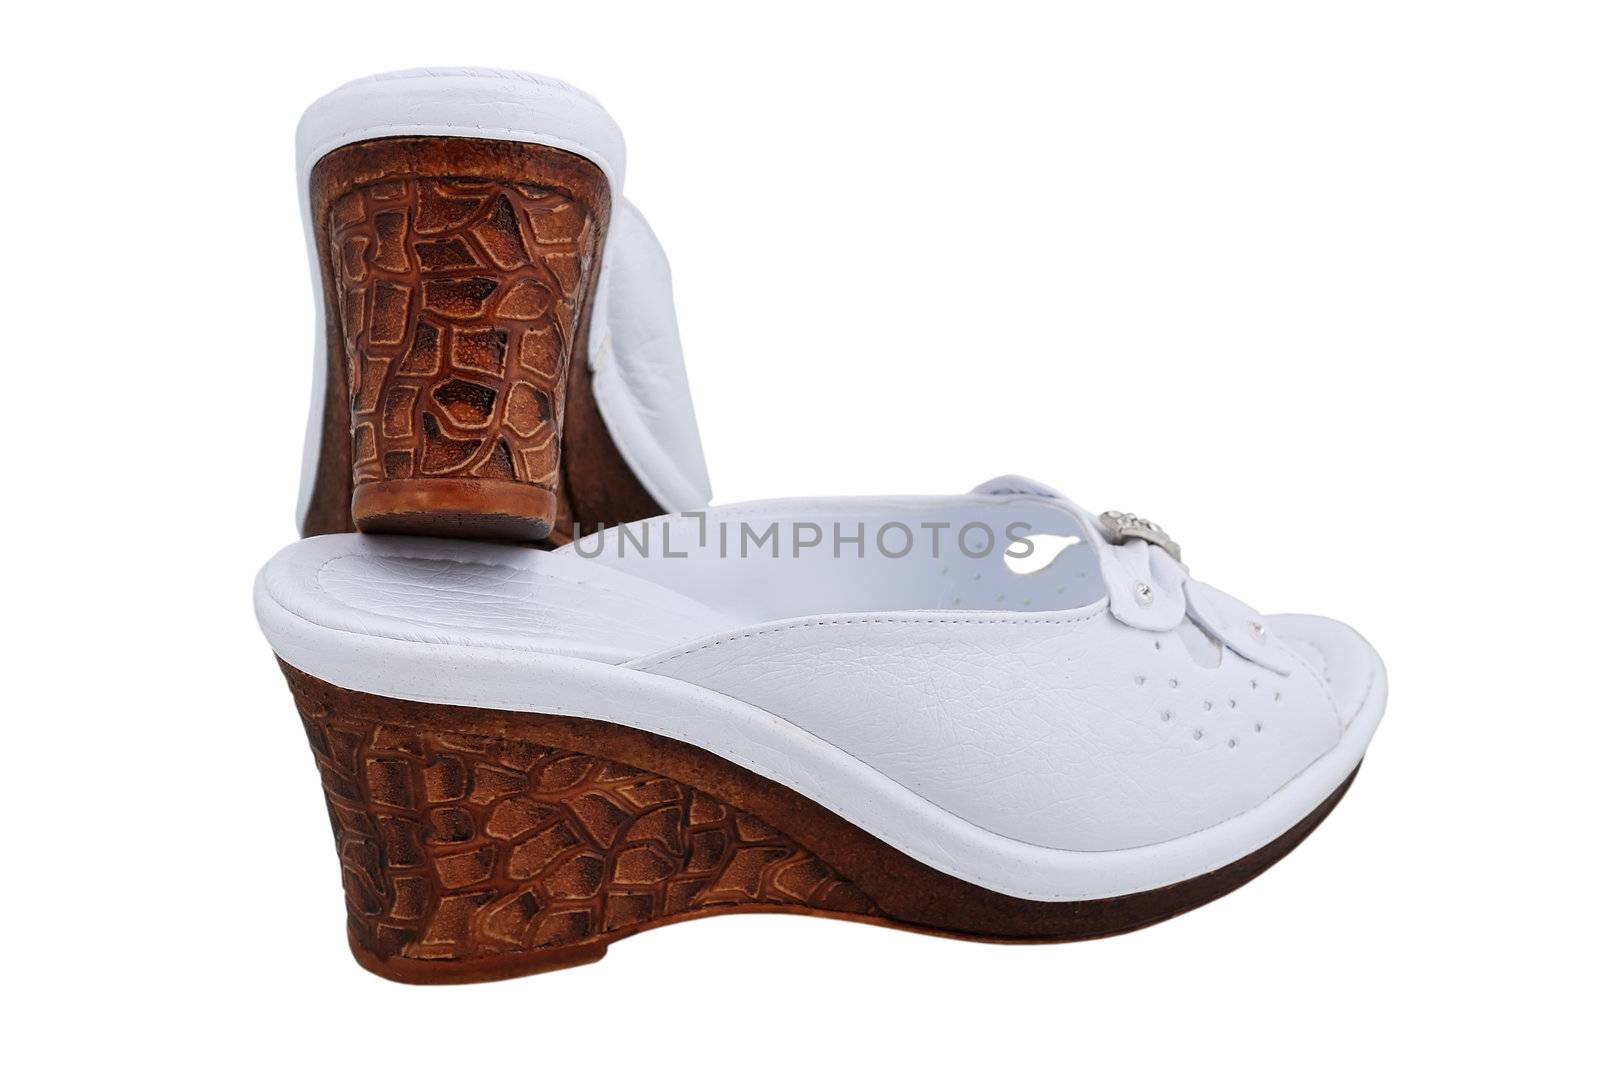 Women's Wedge-heeled shoes on a white background